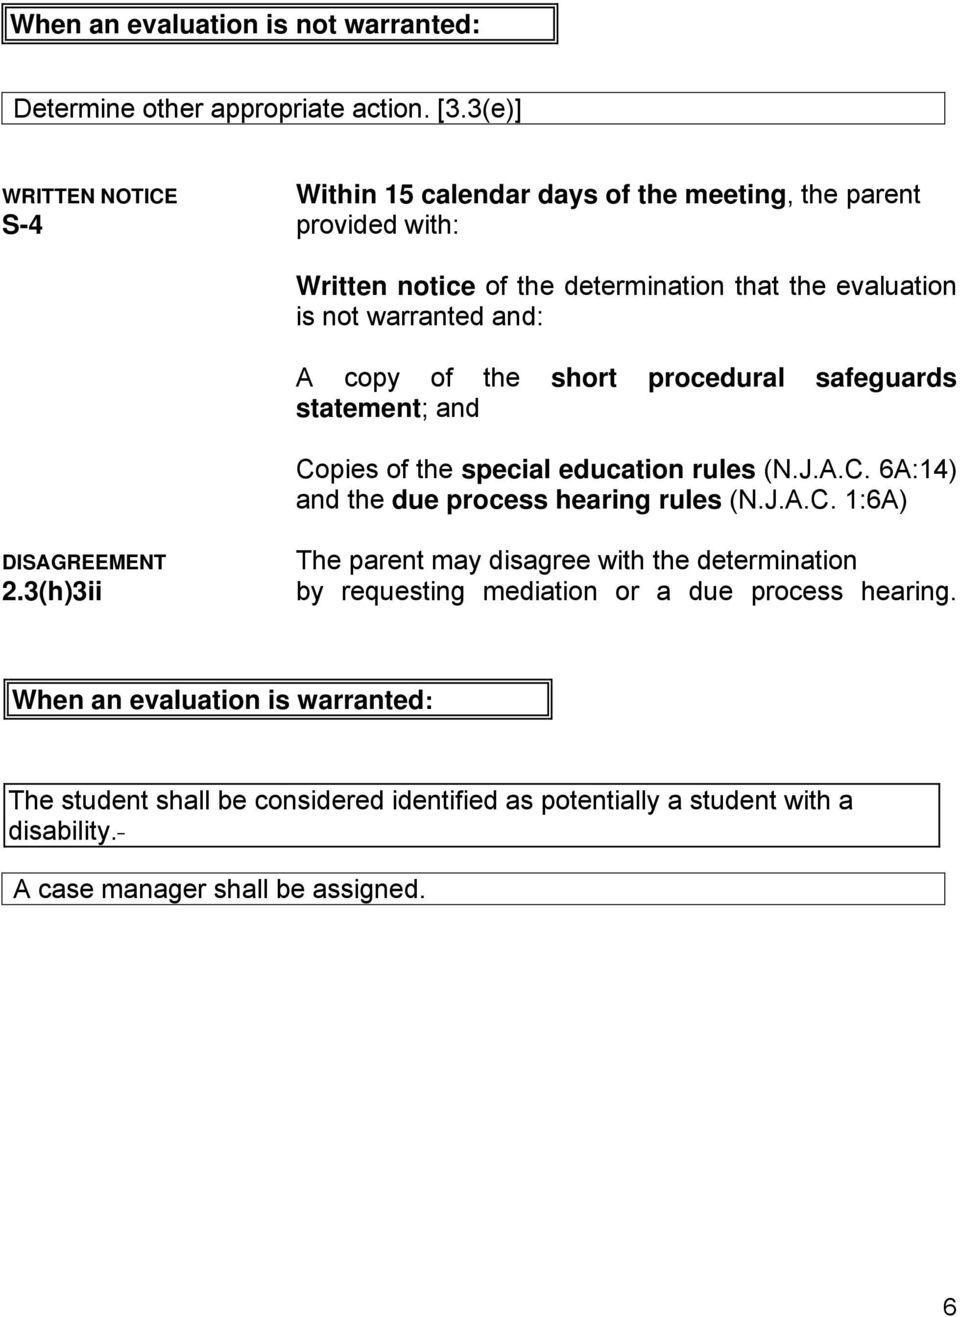 copy of the short procedural safeguards statement; and Copies of the special education rules (N.J.A.C. 6A:14) and the due process hearing rules (N.J.A.C. 1:6A) DISAGREEMENT 2.